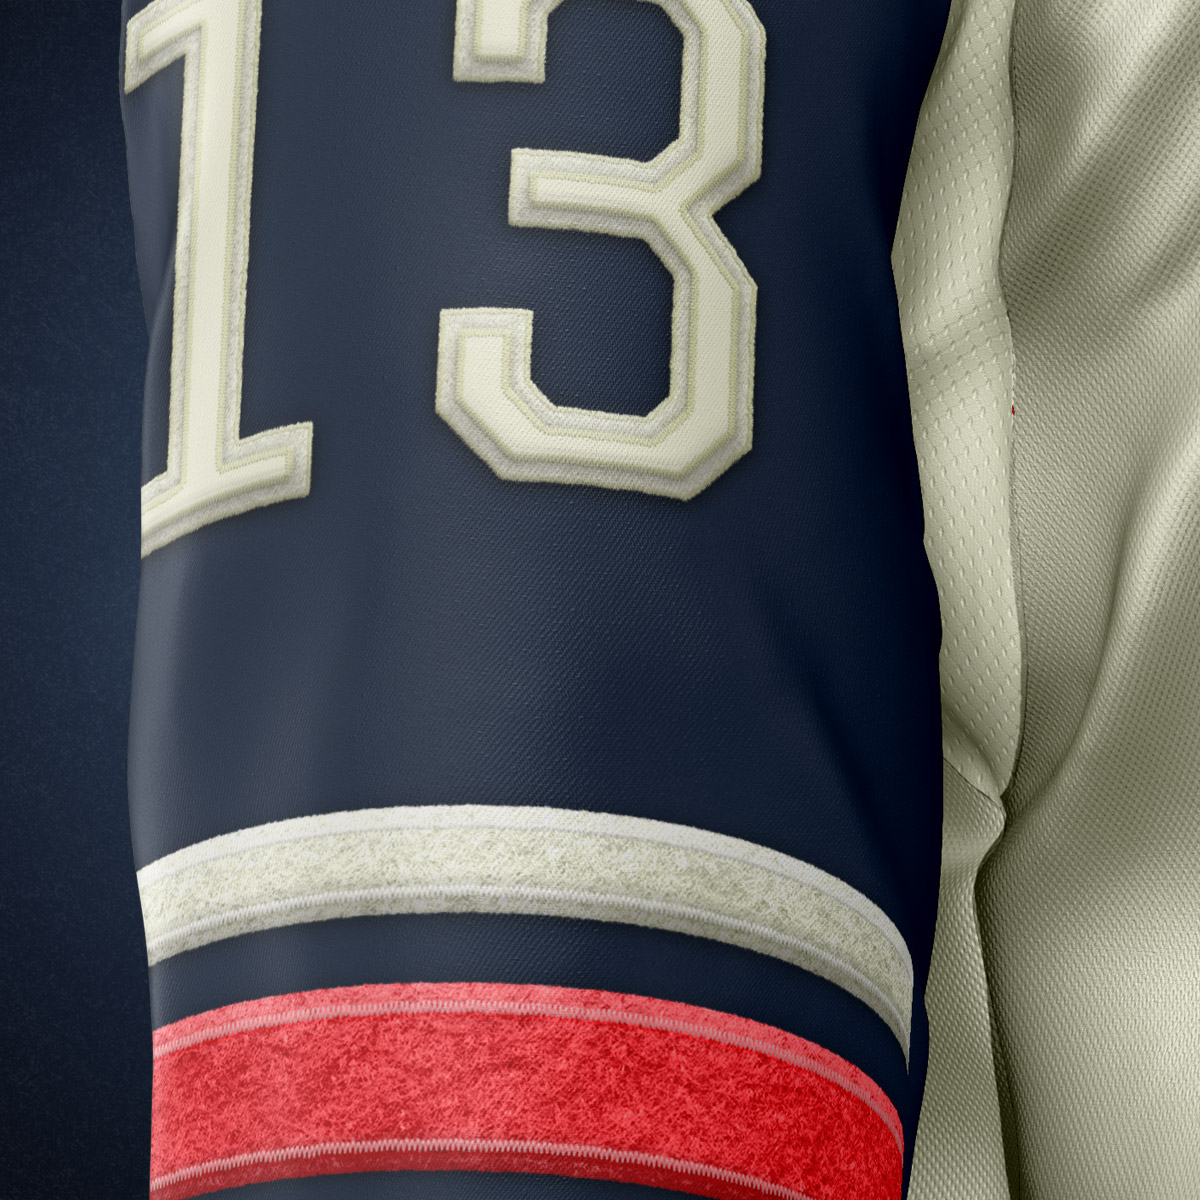 NYR jersey concept back view